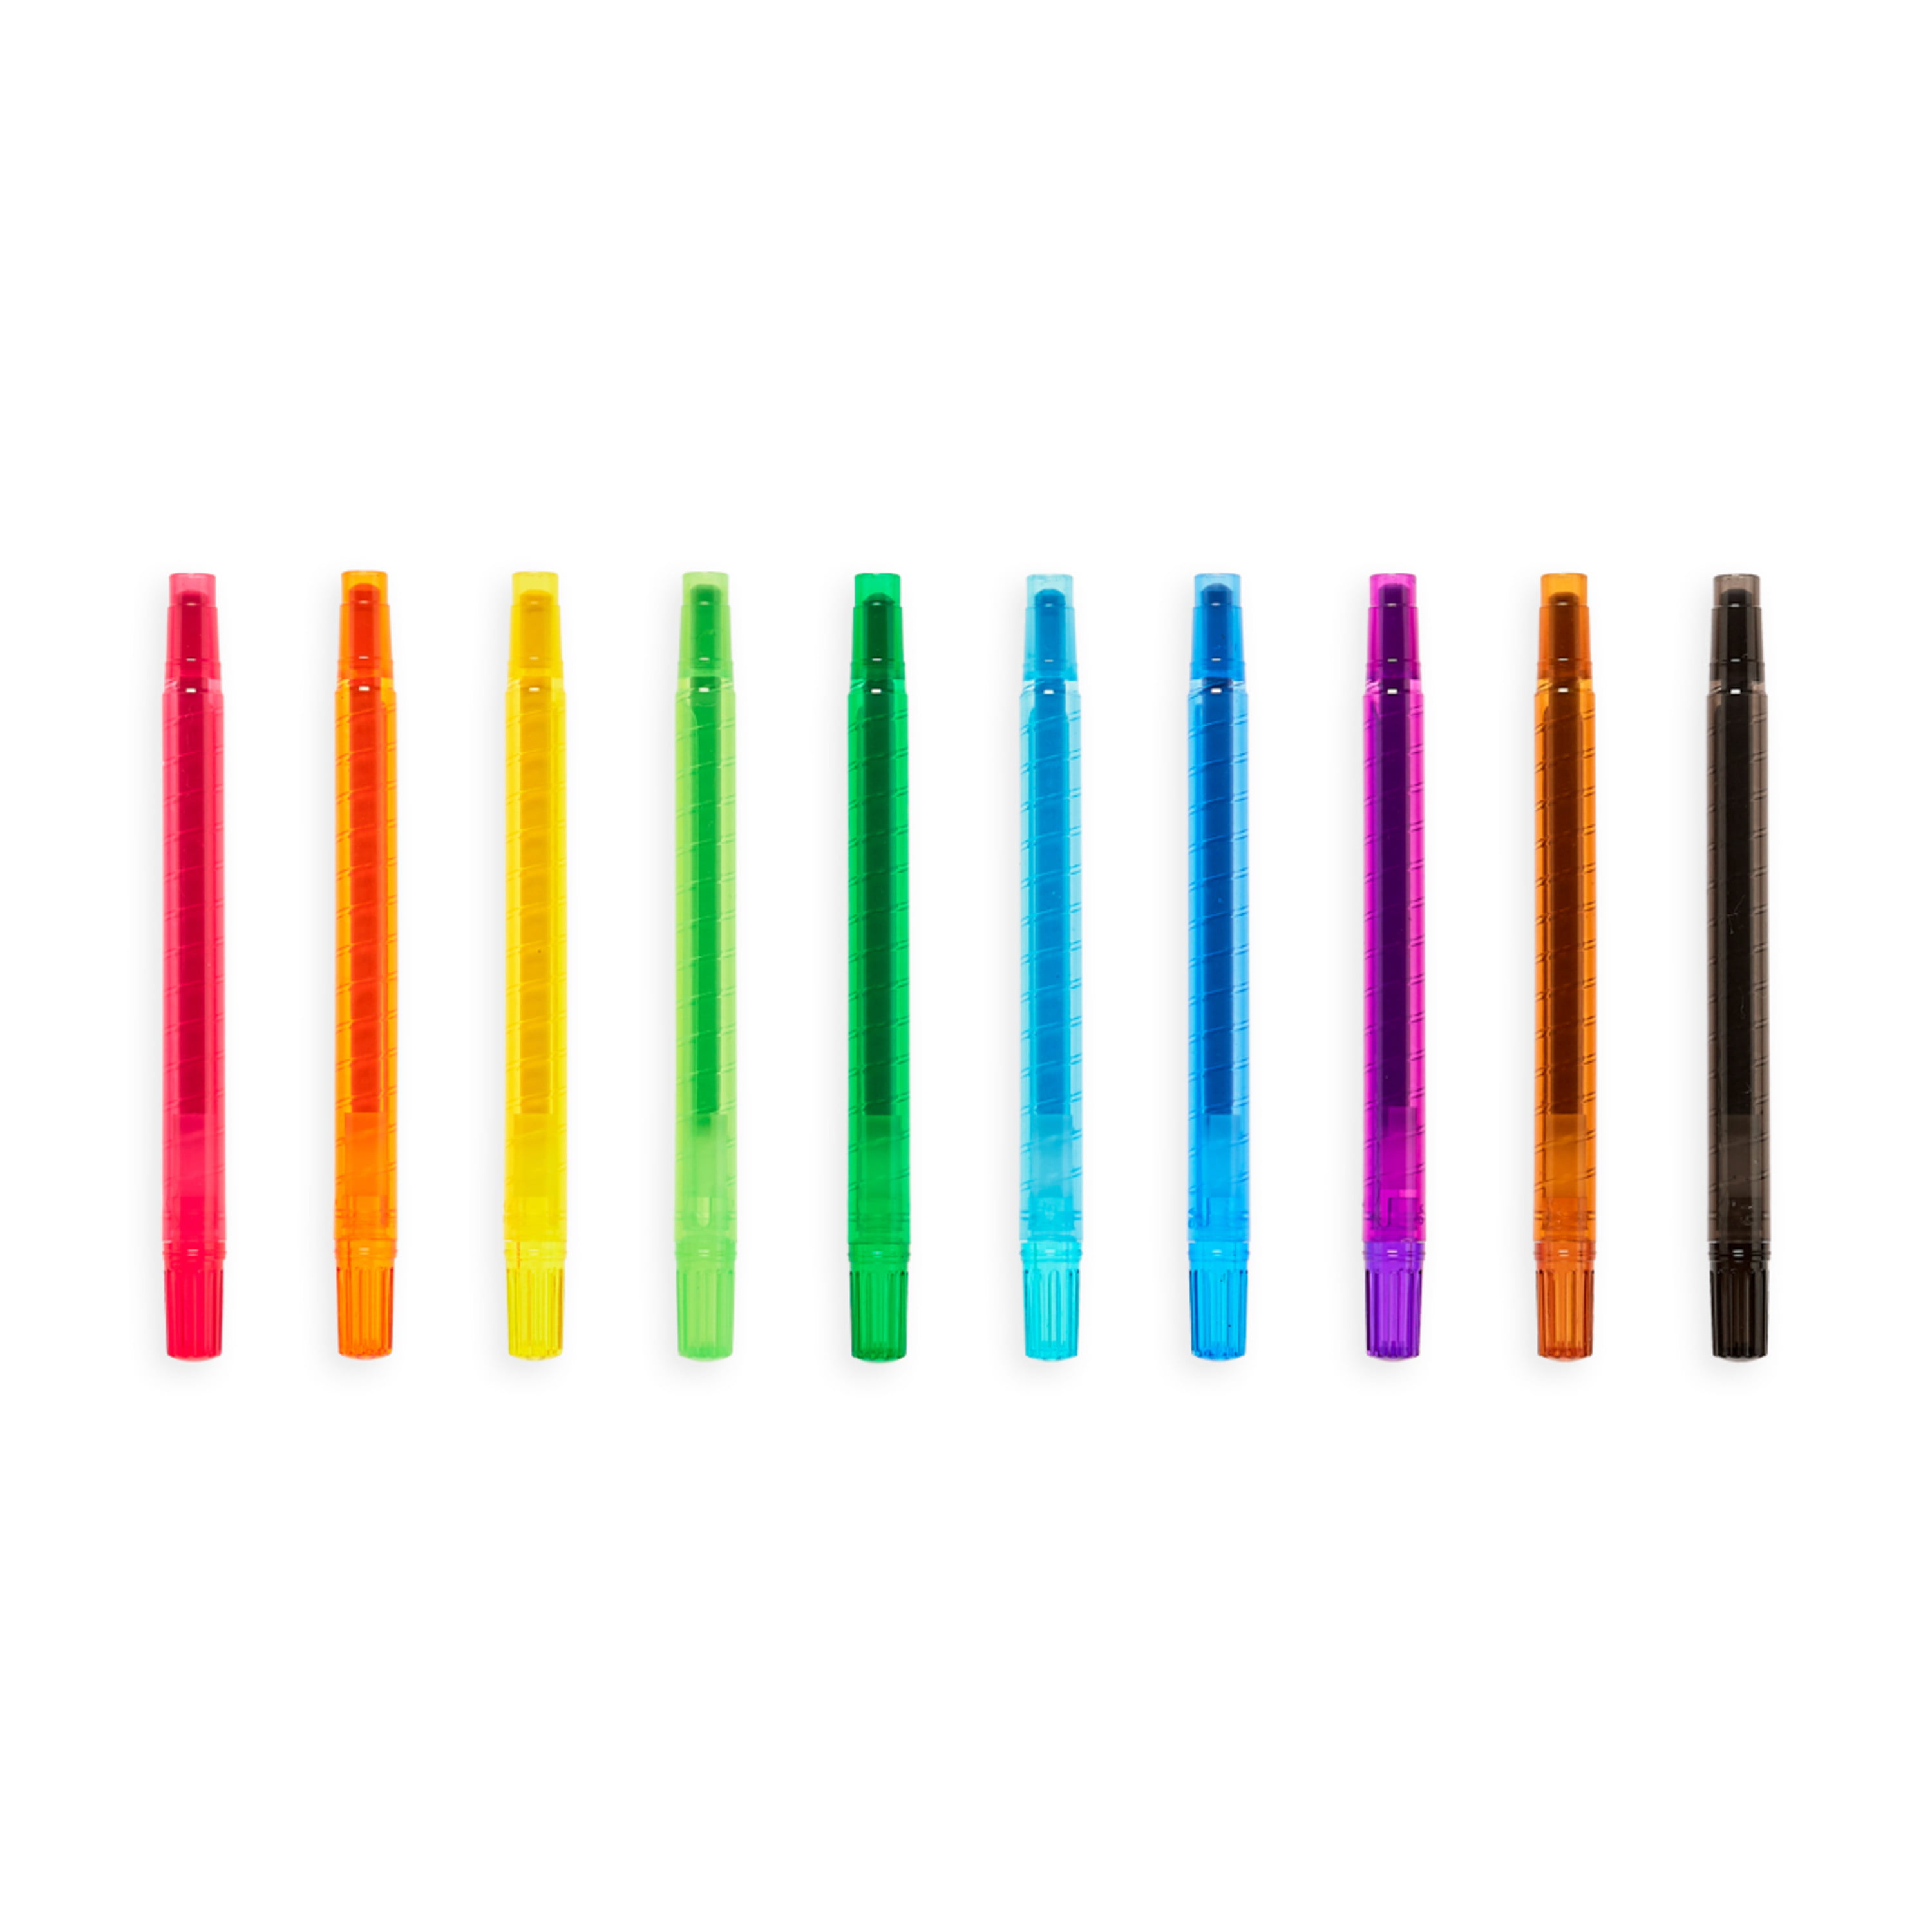 Yummy Yummy scented twist-up crayons, 10 st